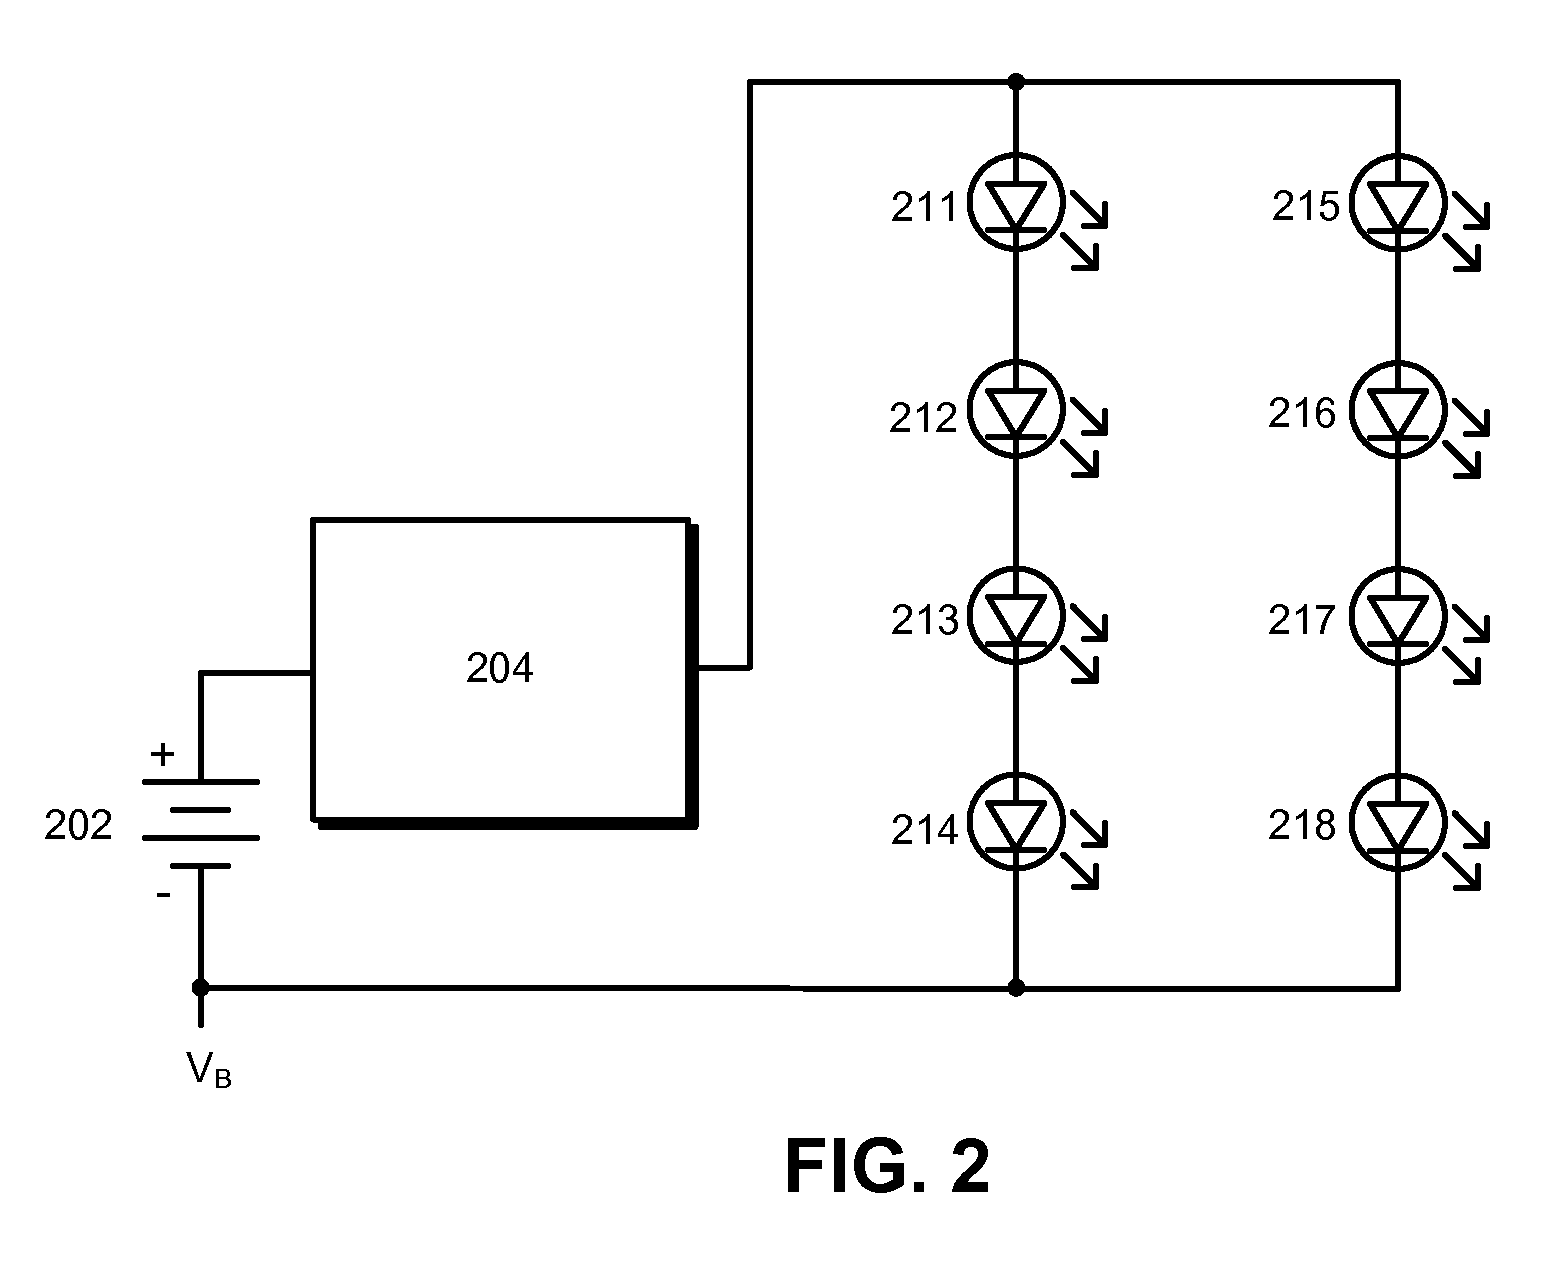 Resonant-recovery power-reduction technique for boost converters